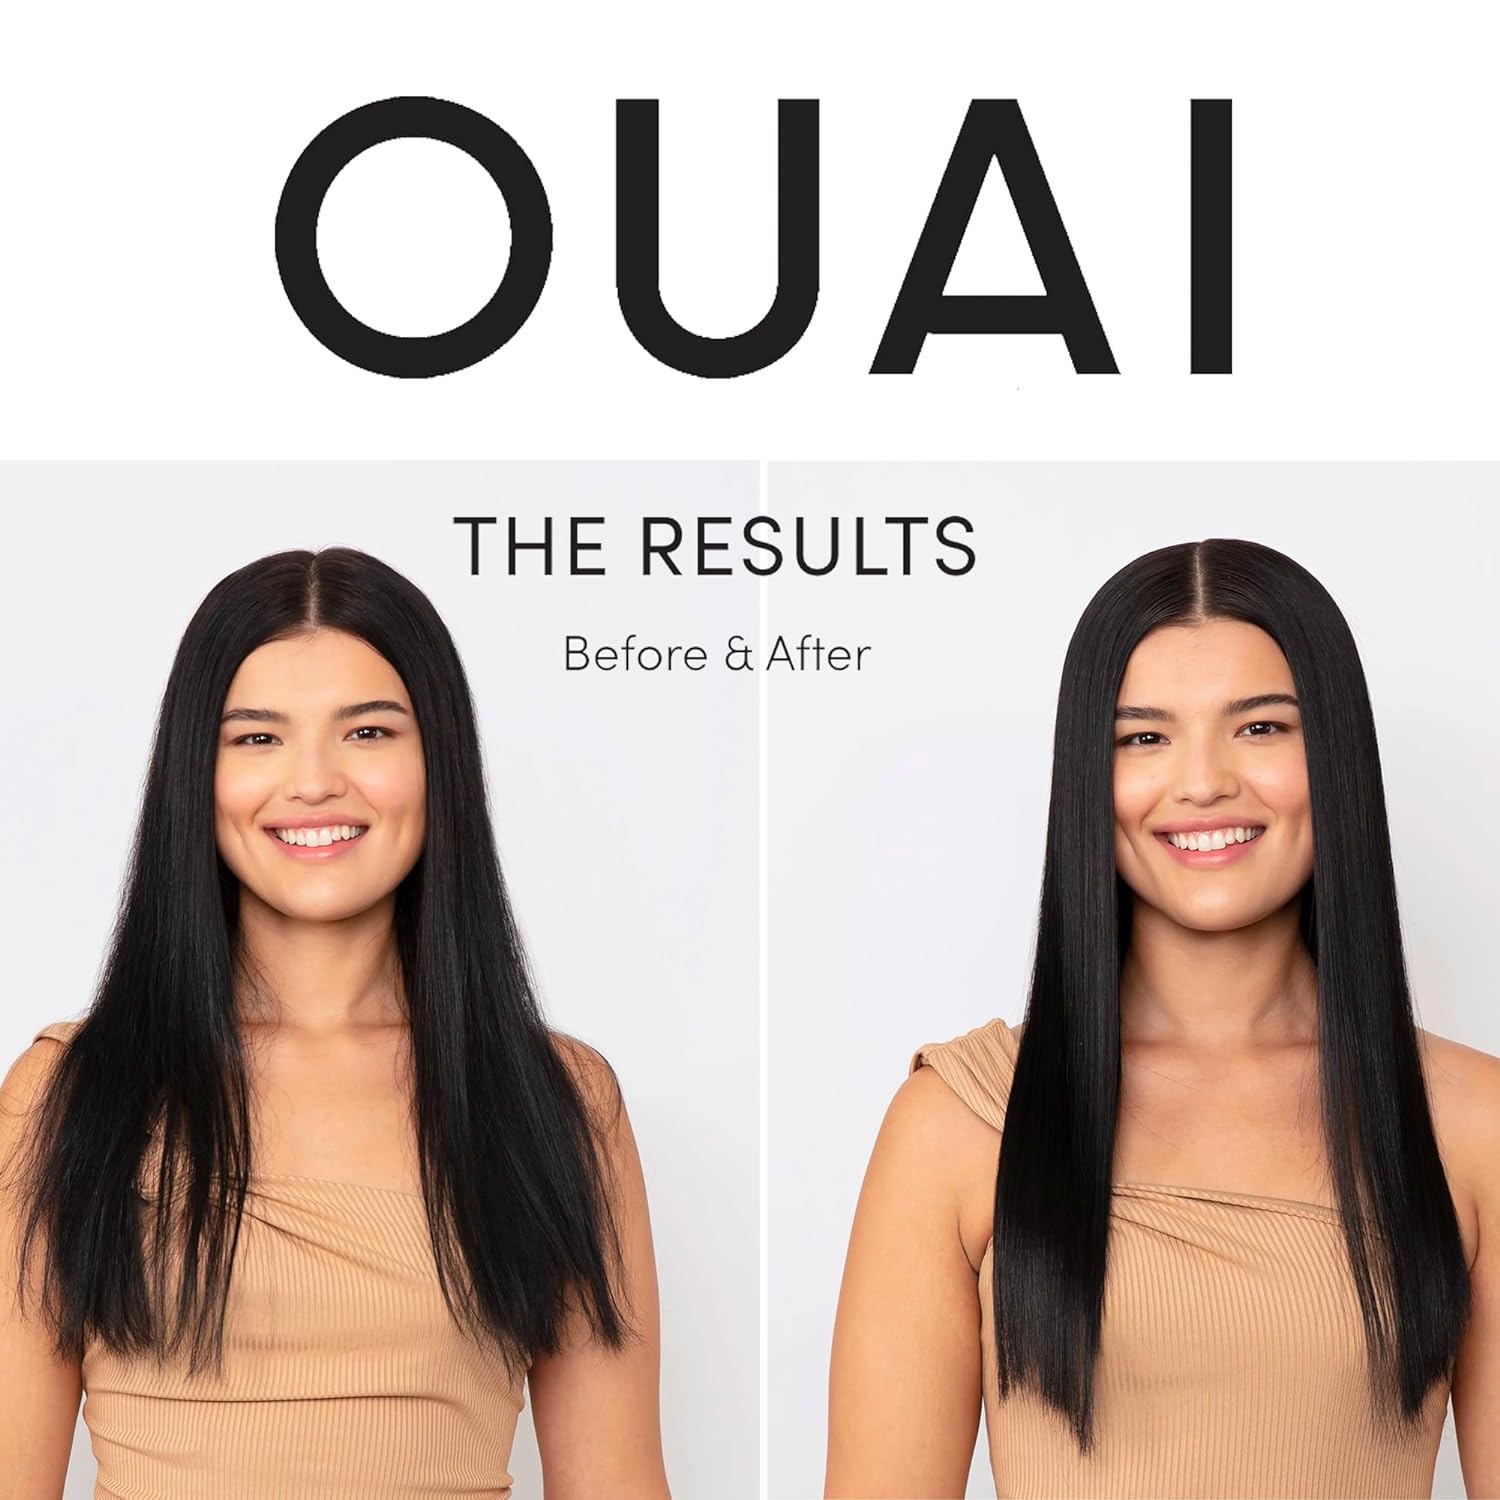 OUAI Hair Oil Bundle - Hair Heat Protectant Oil for Frizz Control - Adds Hair Shine and Smooths Split Ends - Color Safe Formula - Paraben, Phthalate and Sulfate Free (2 Count, 0.45 Oz/1.5 Oz) : Beauty & Personal Care